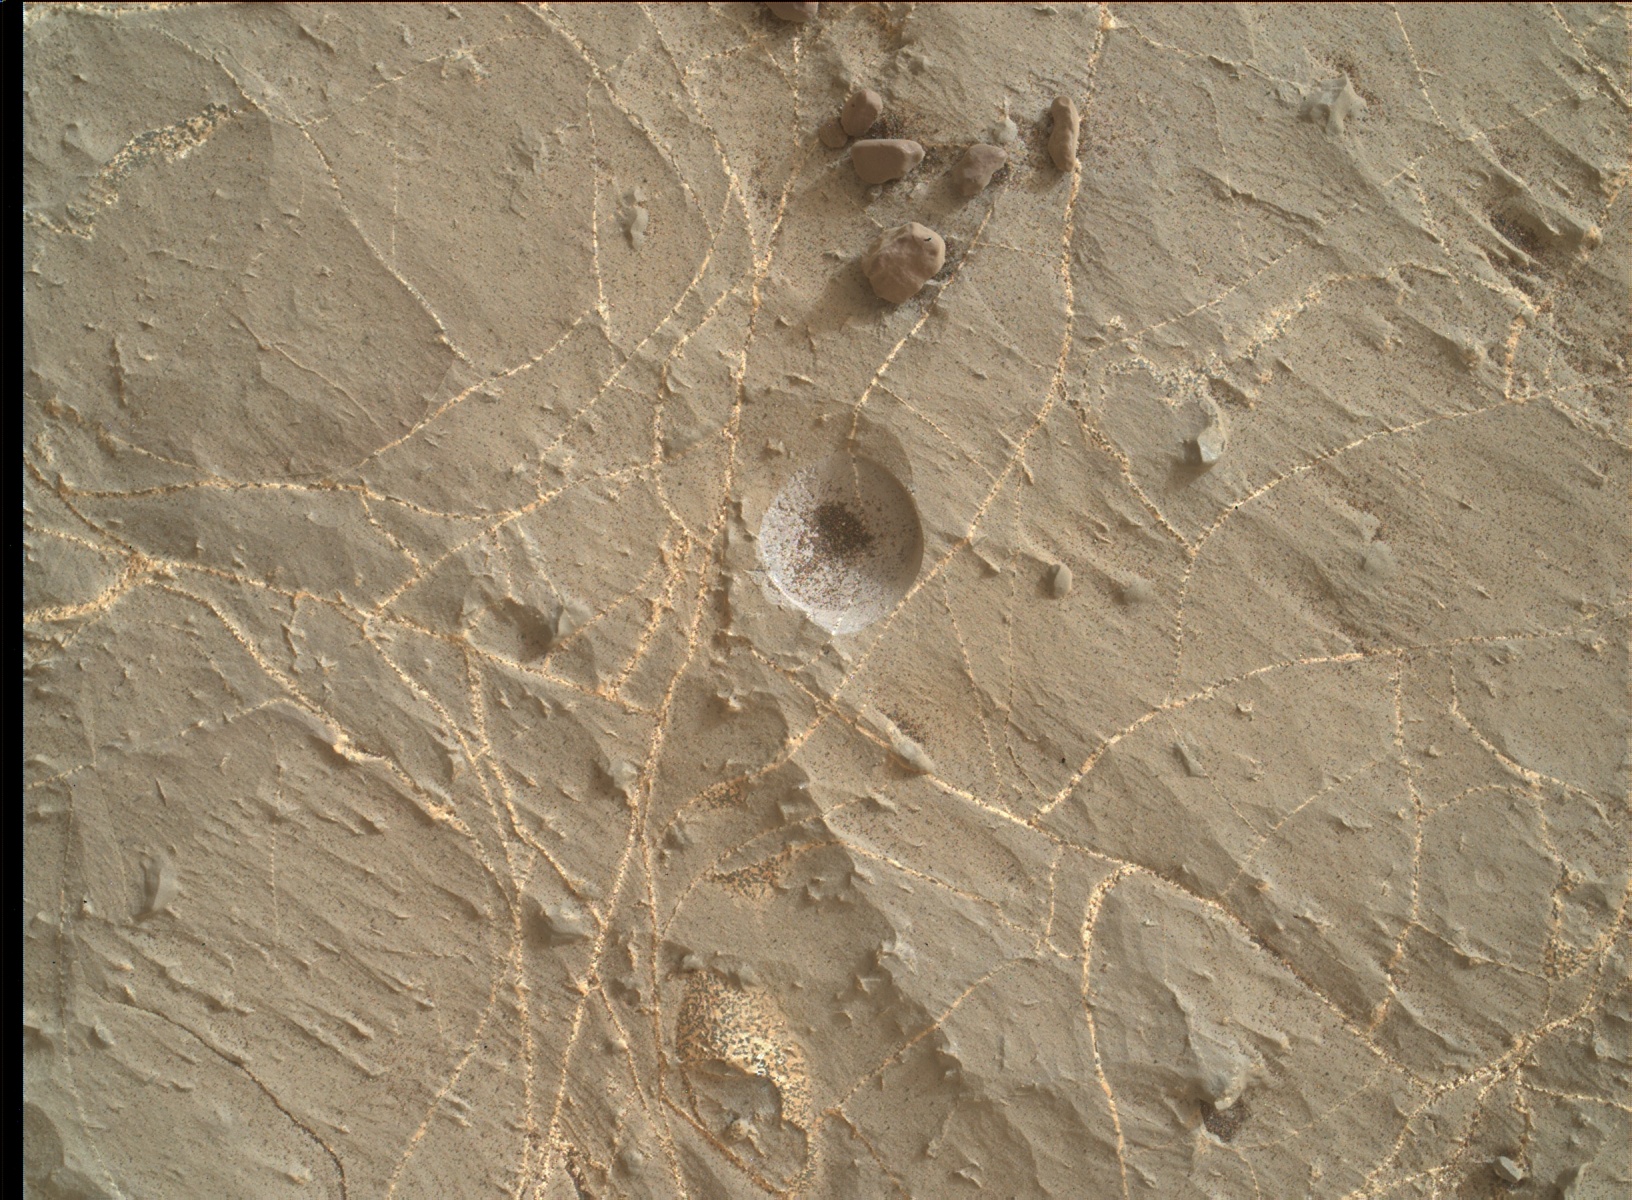 Nasa's Mars rover Curiosity acquired this image using its Mars Hand Lens Imager (MAHLI) on Sol 2217